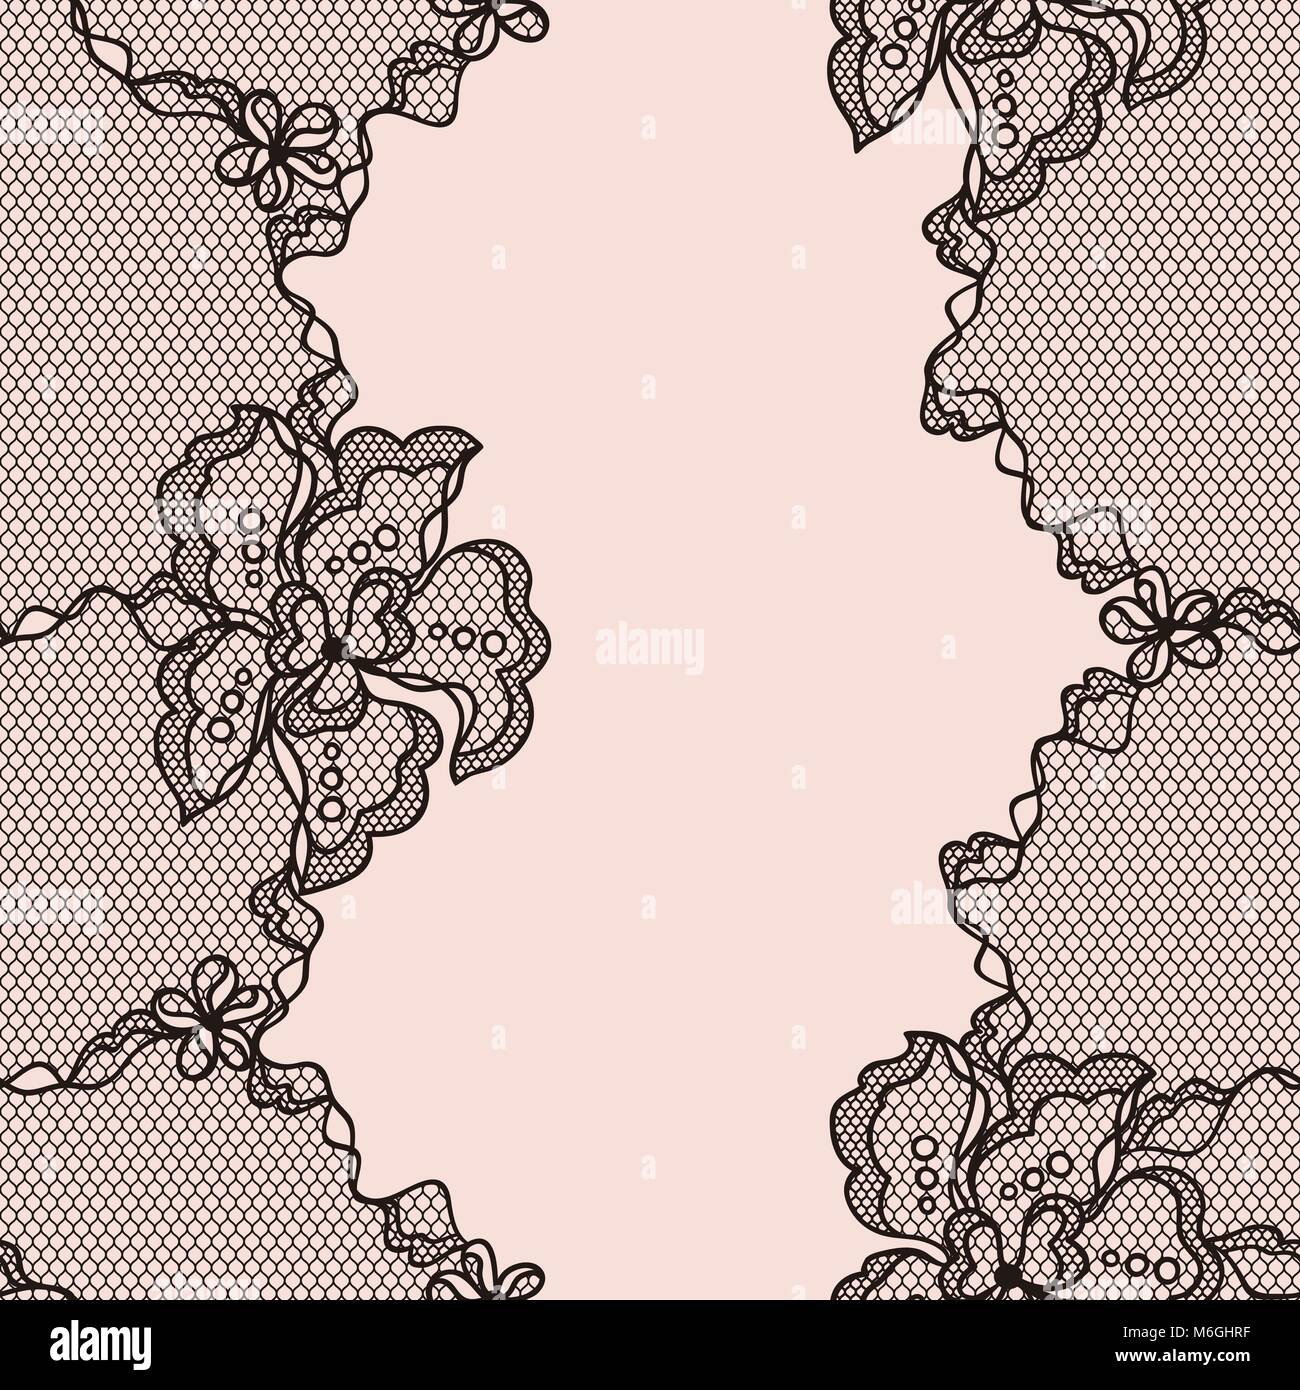 Lace fabric seamless pattern with abstract flowers Stock Vector Image ...